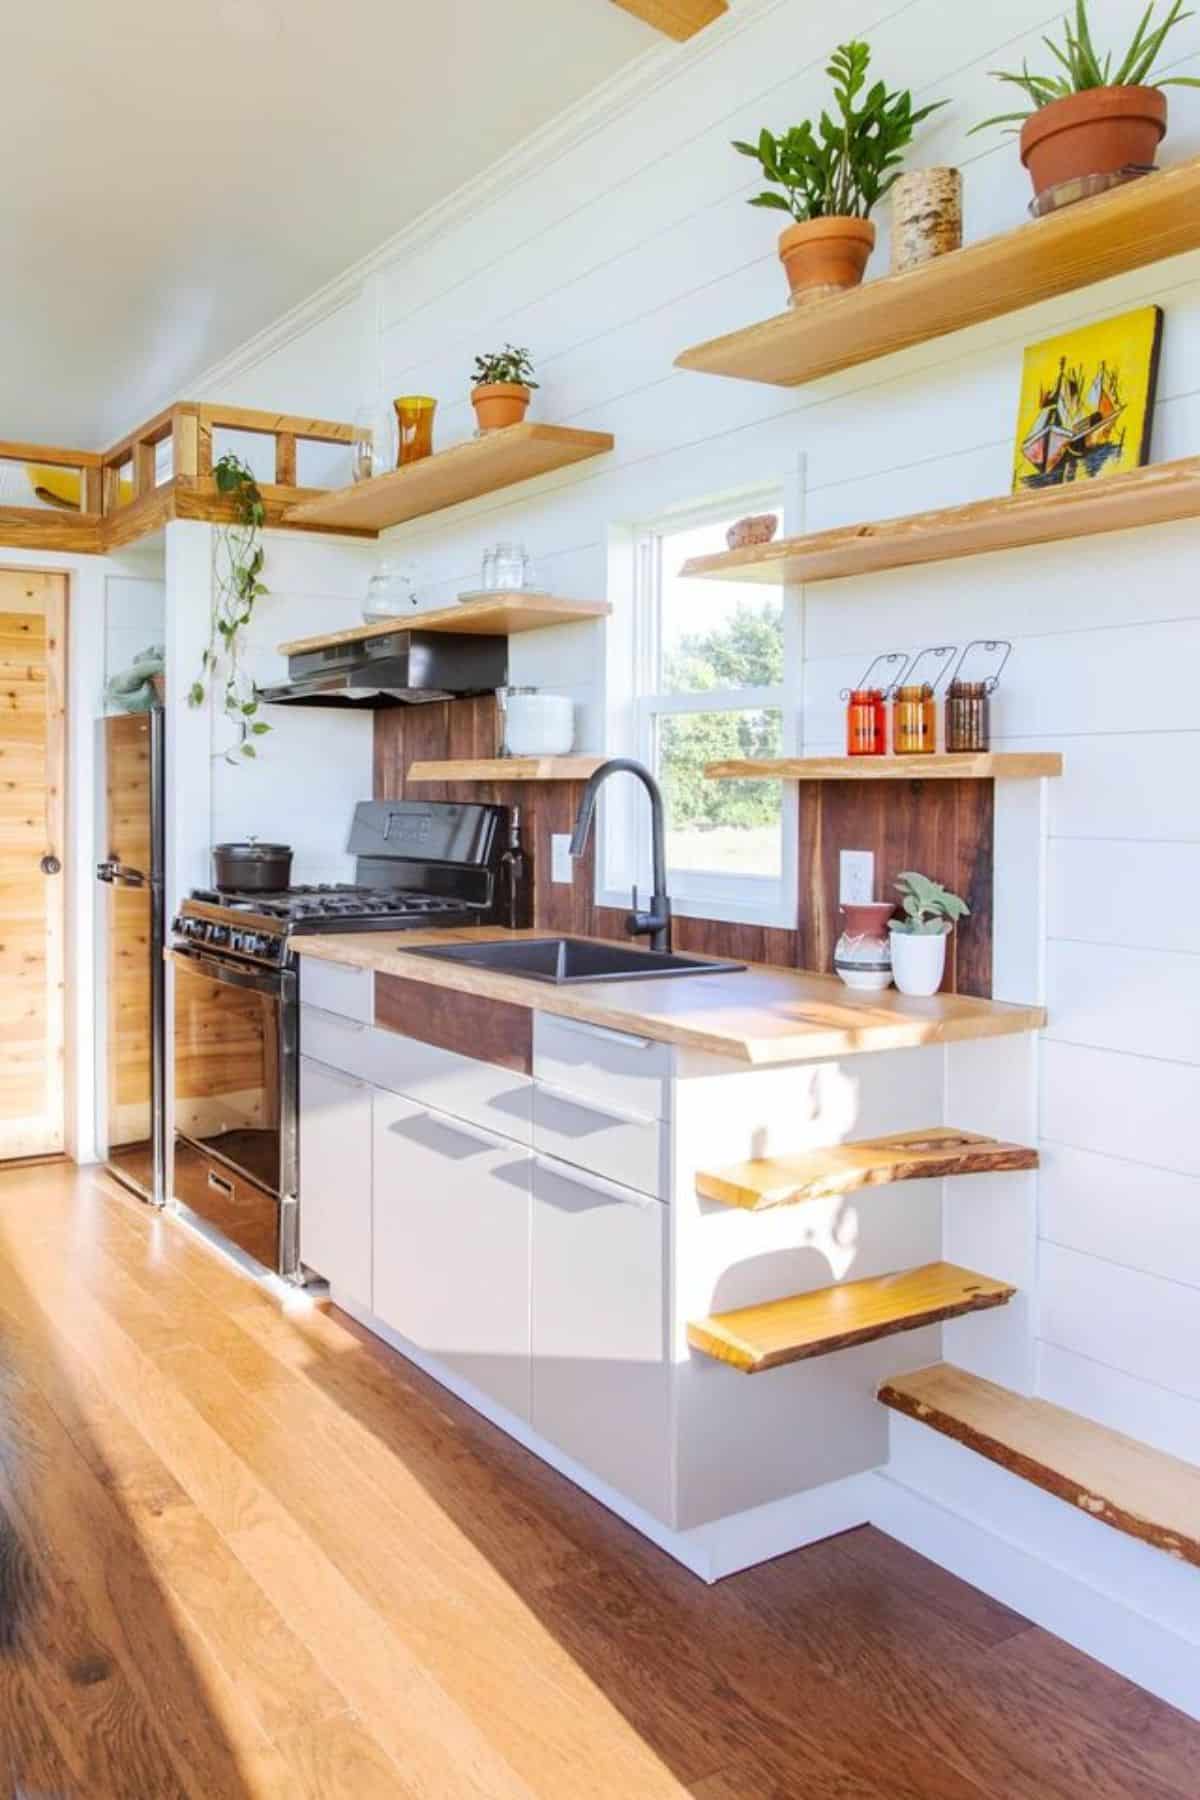 Well organized and furnished kitchen area of one bedroom tiny home with all the appliances and storage